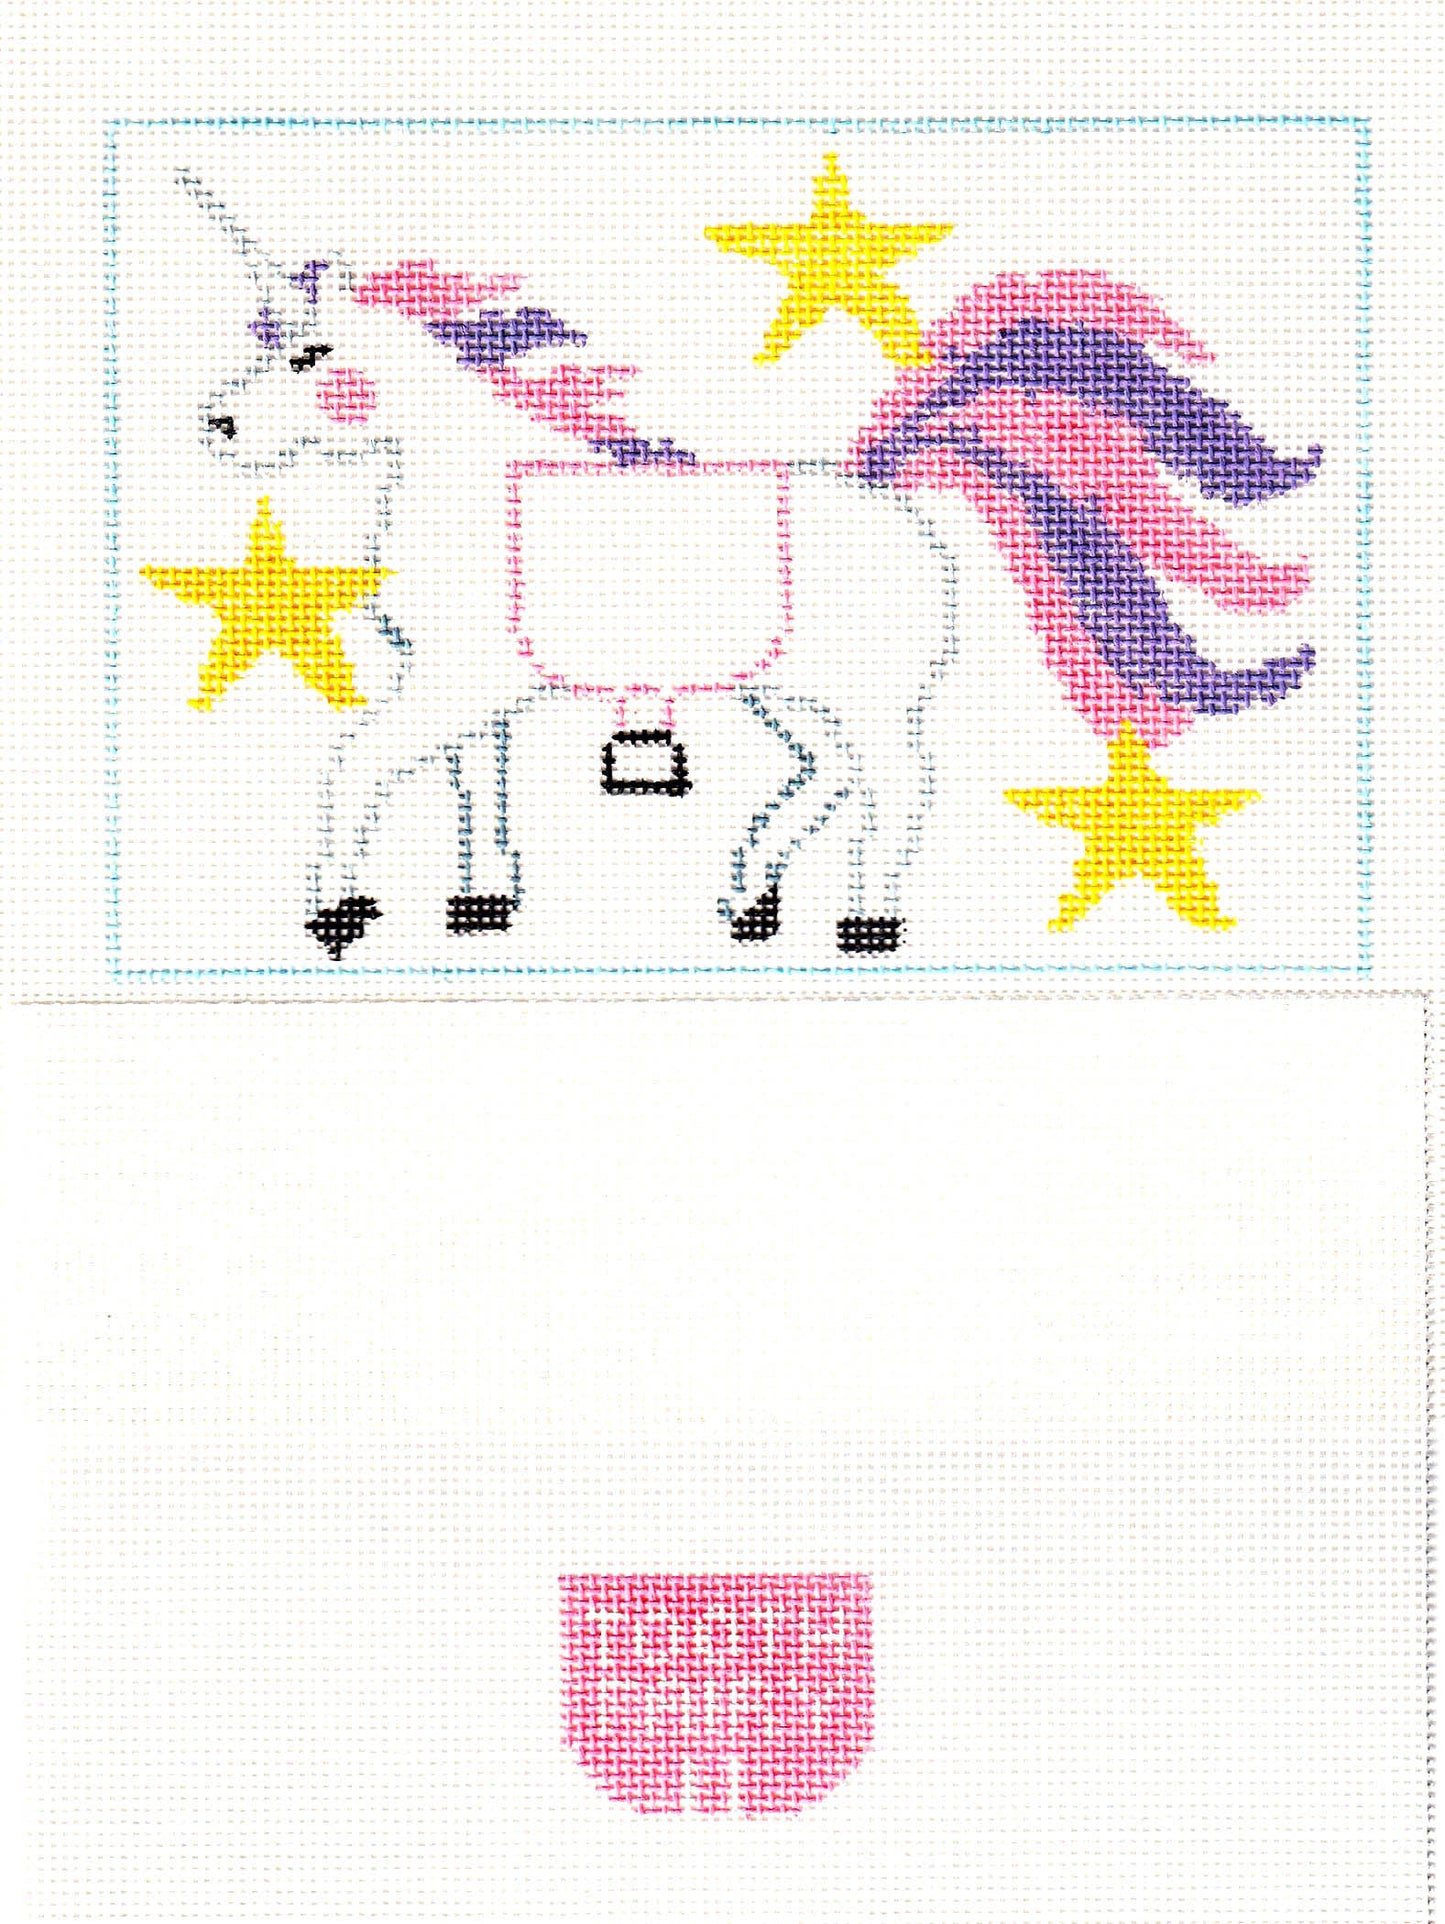 Tooth Fairy Canvas ~ Tooth Fairy Pillow UNICORN 2 Canvas SET, 18 Mesh HP Needlepoint Canvas by Kathy Schenkel